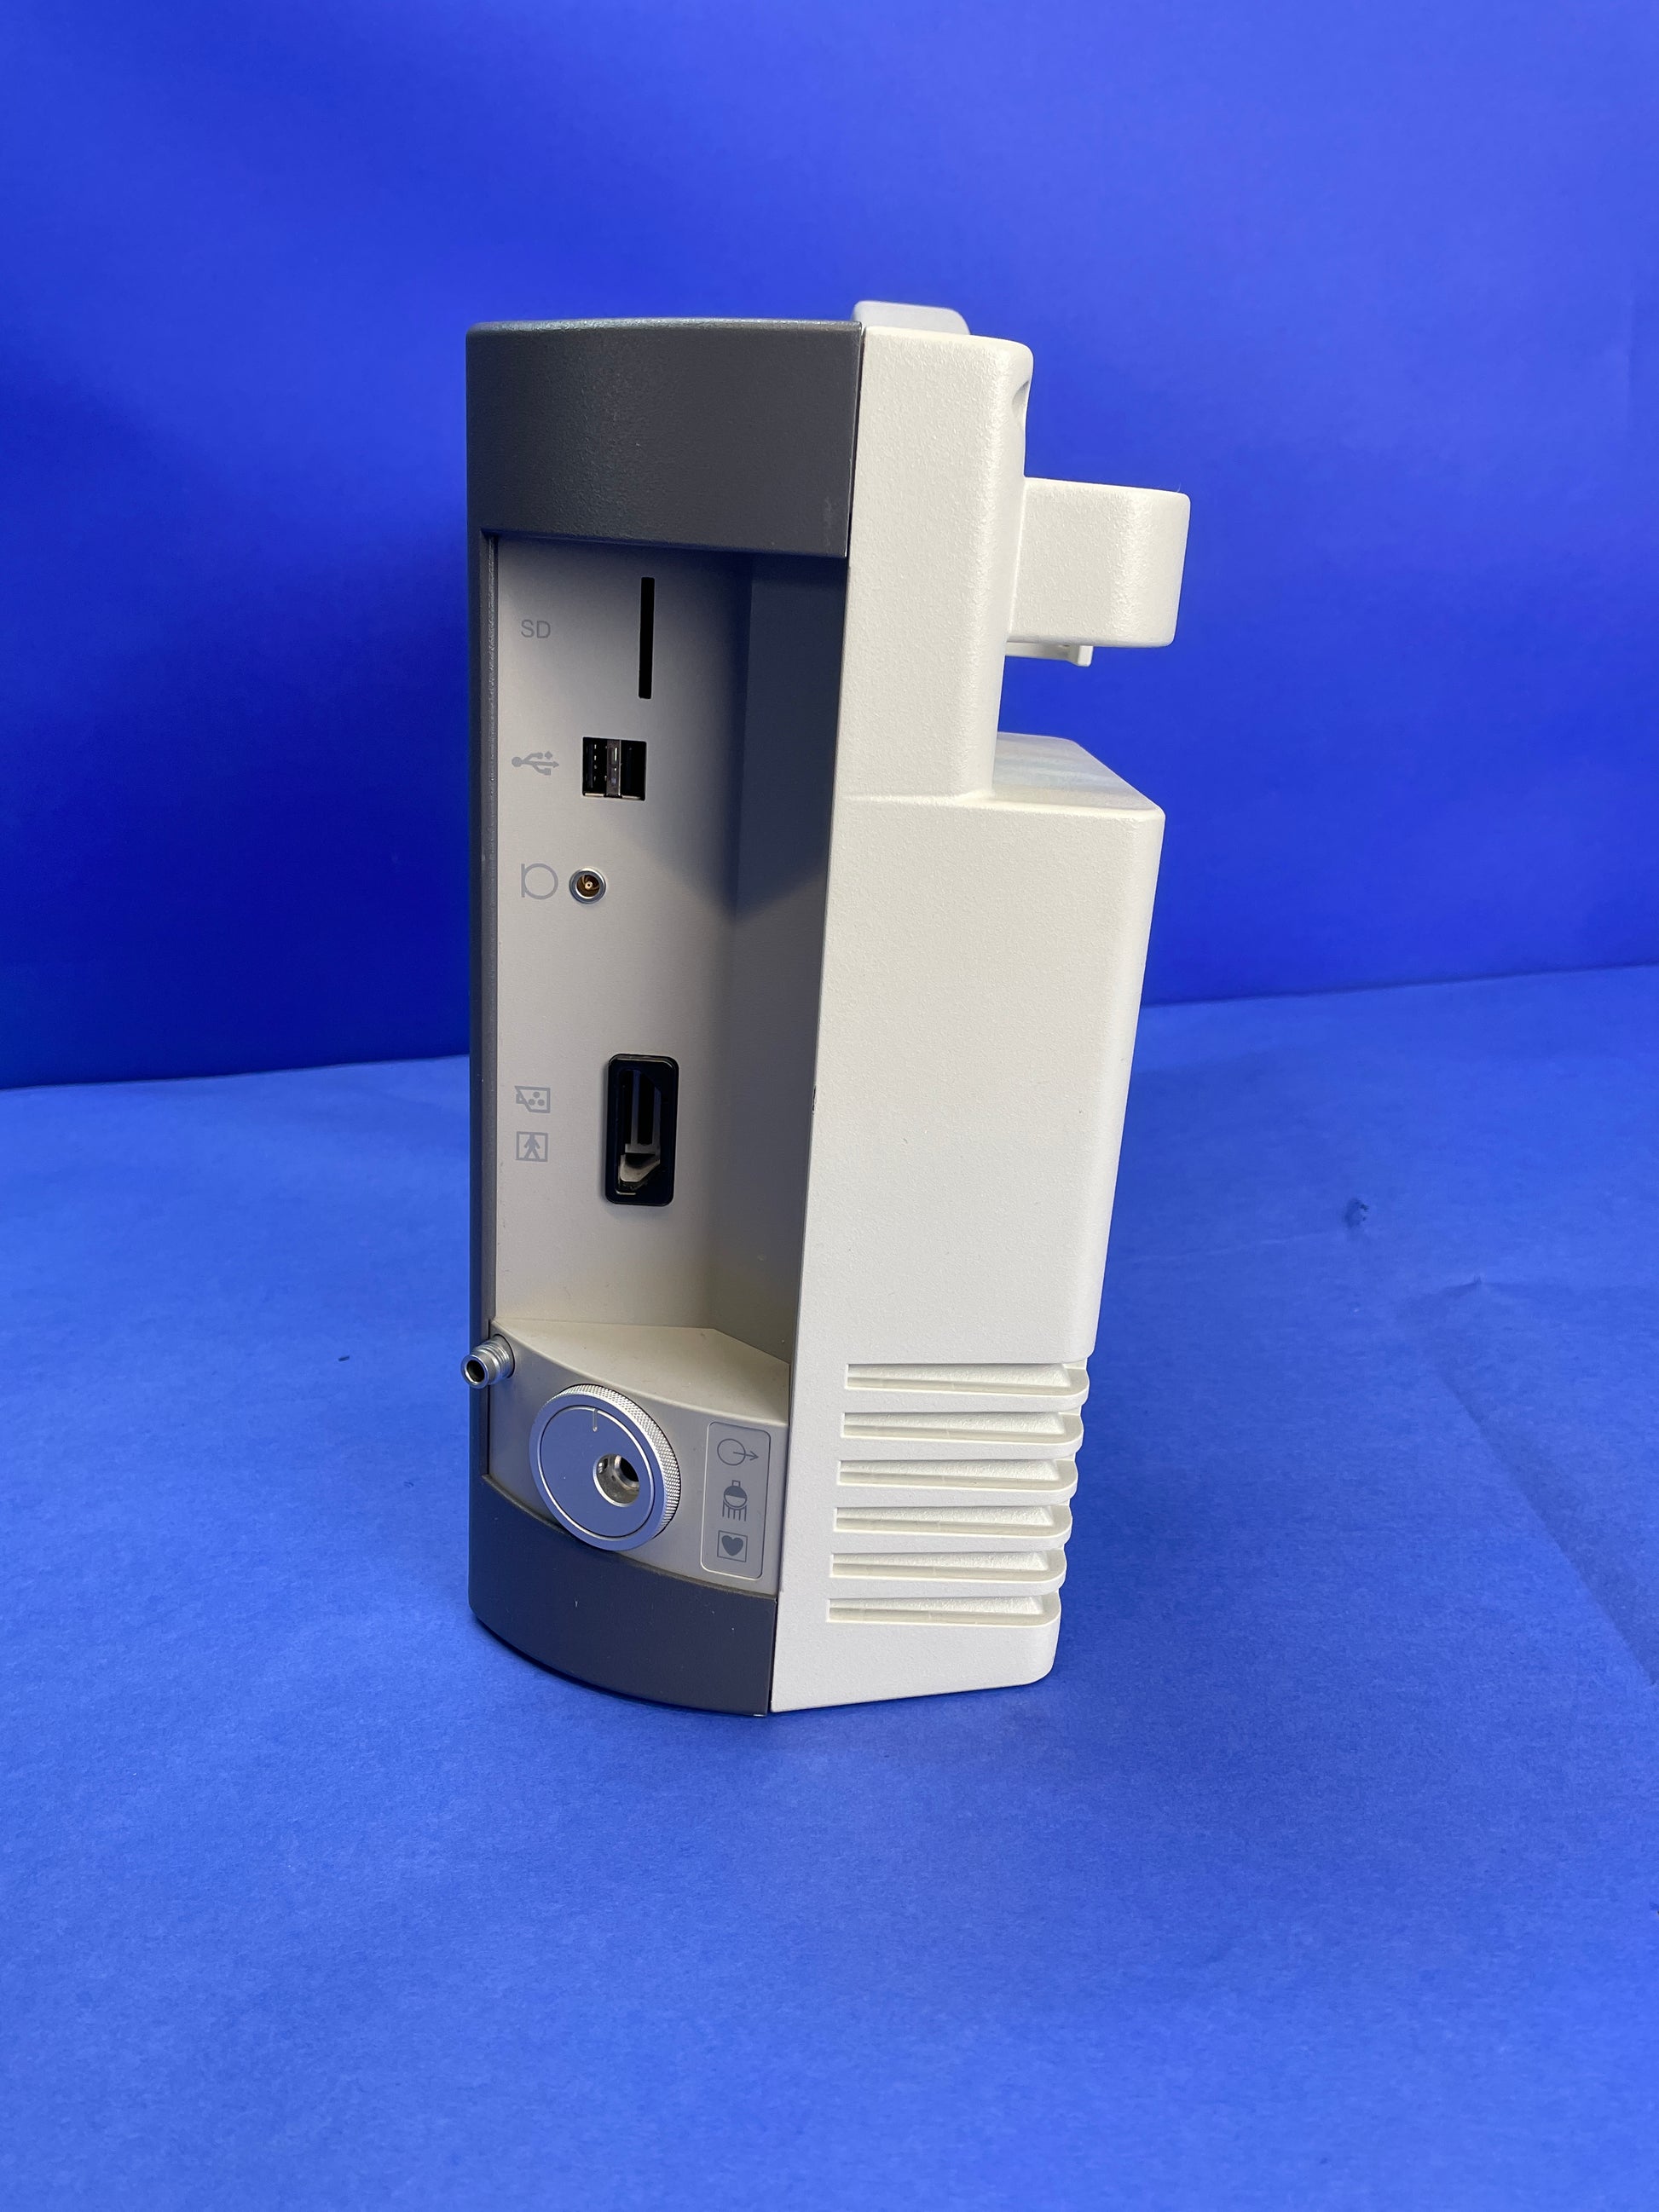 Storz Telepack x Connector and USB ports area